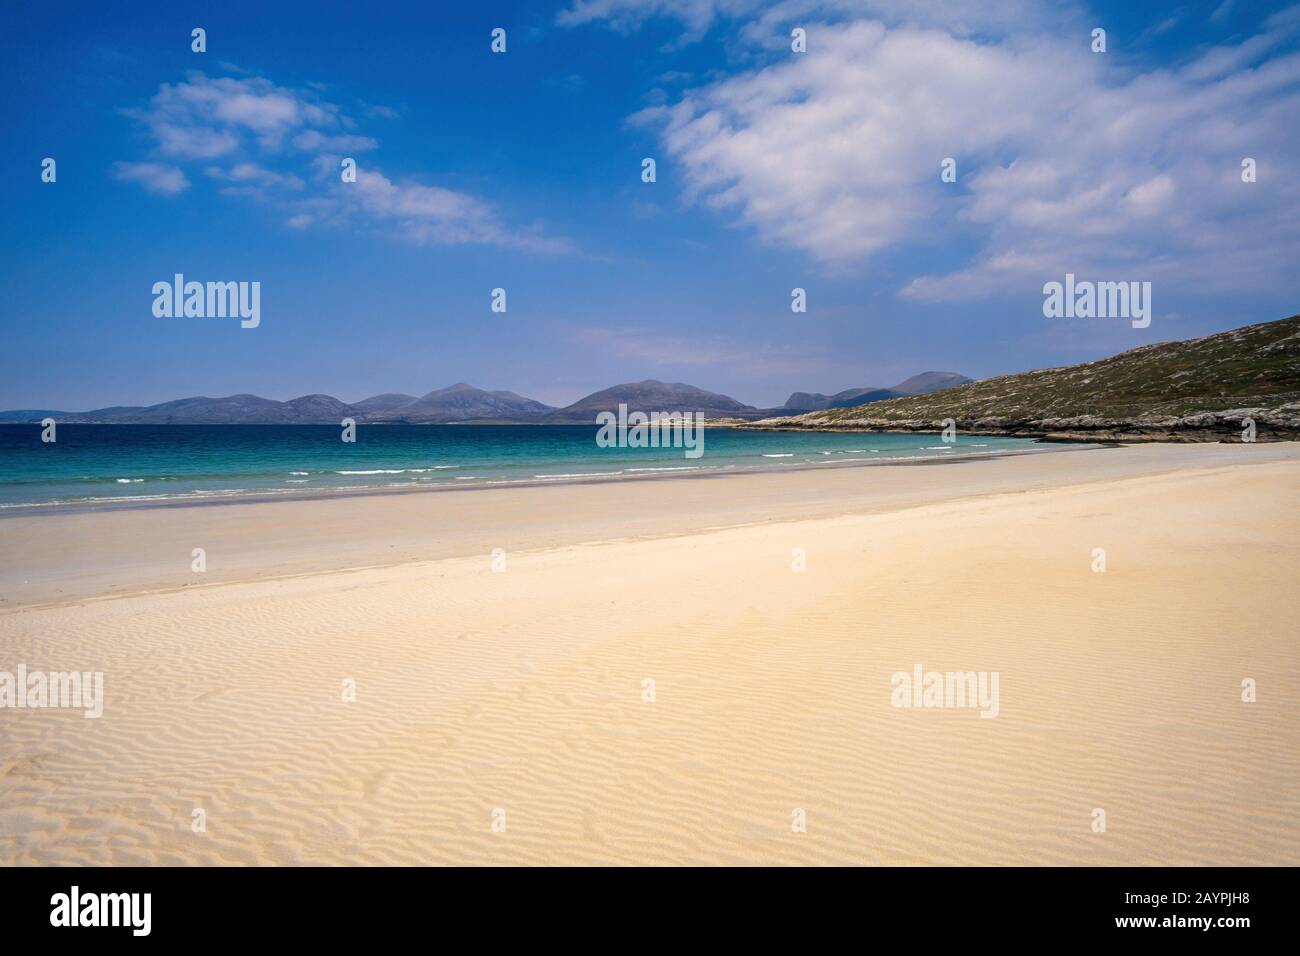 The beautiful deserted sandy Traigh Rosamol beach at Luskentyre (Losgaintir) on the Isle of Harris in the Outer Hebrides, Scotland, UK Stock Photo